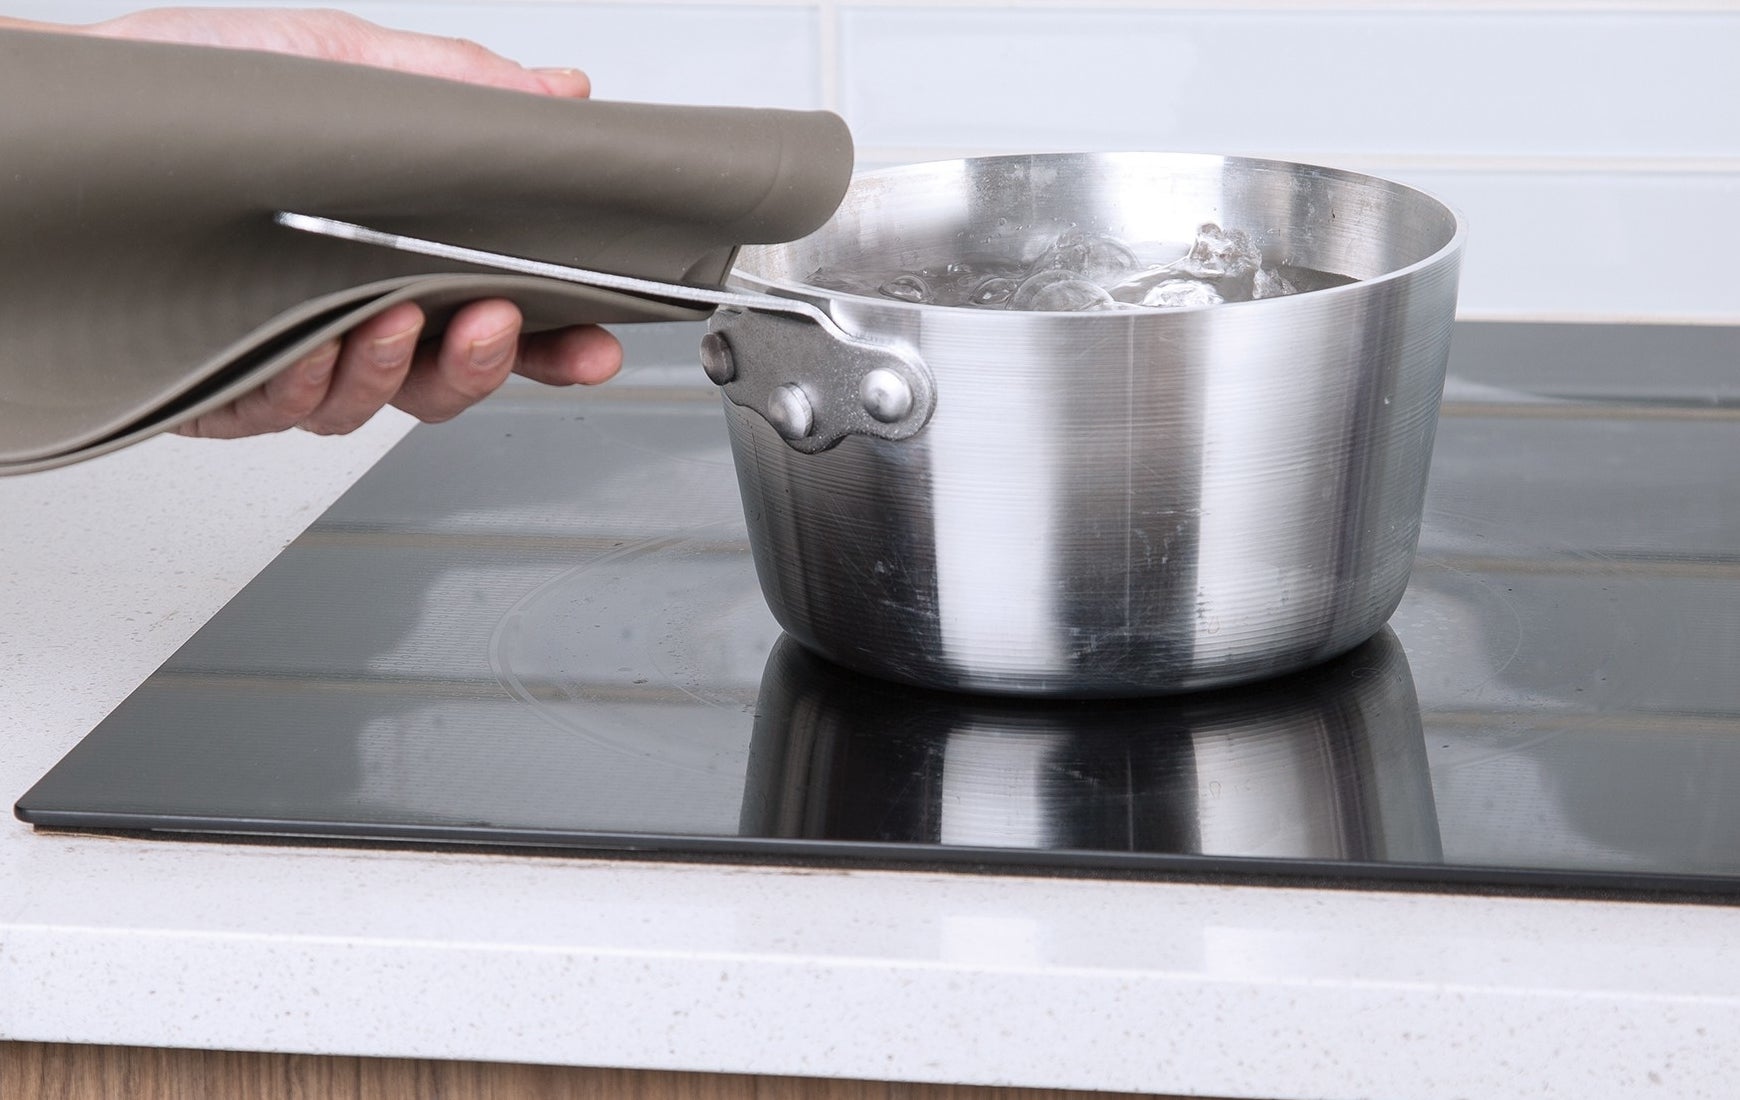 Person using the mat as a potholder to hold a pot handle on a stove